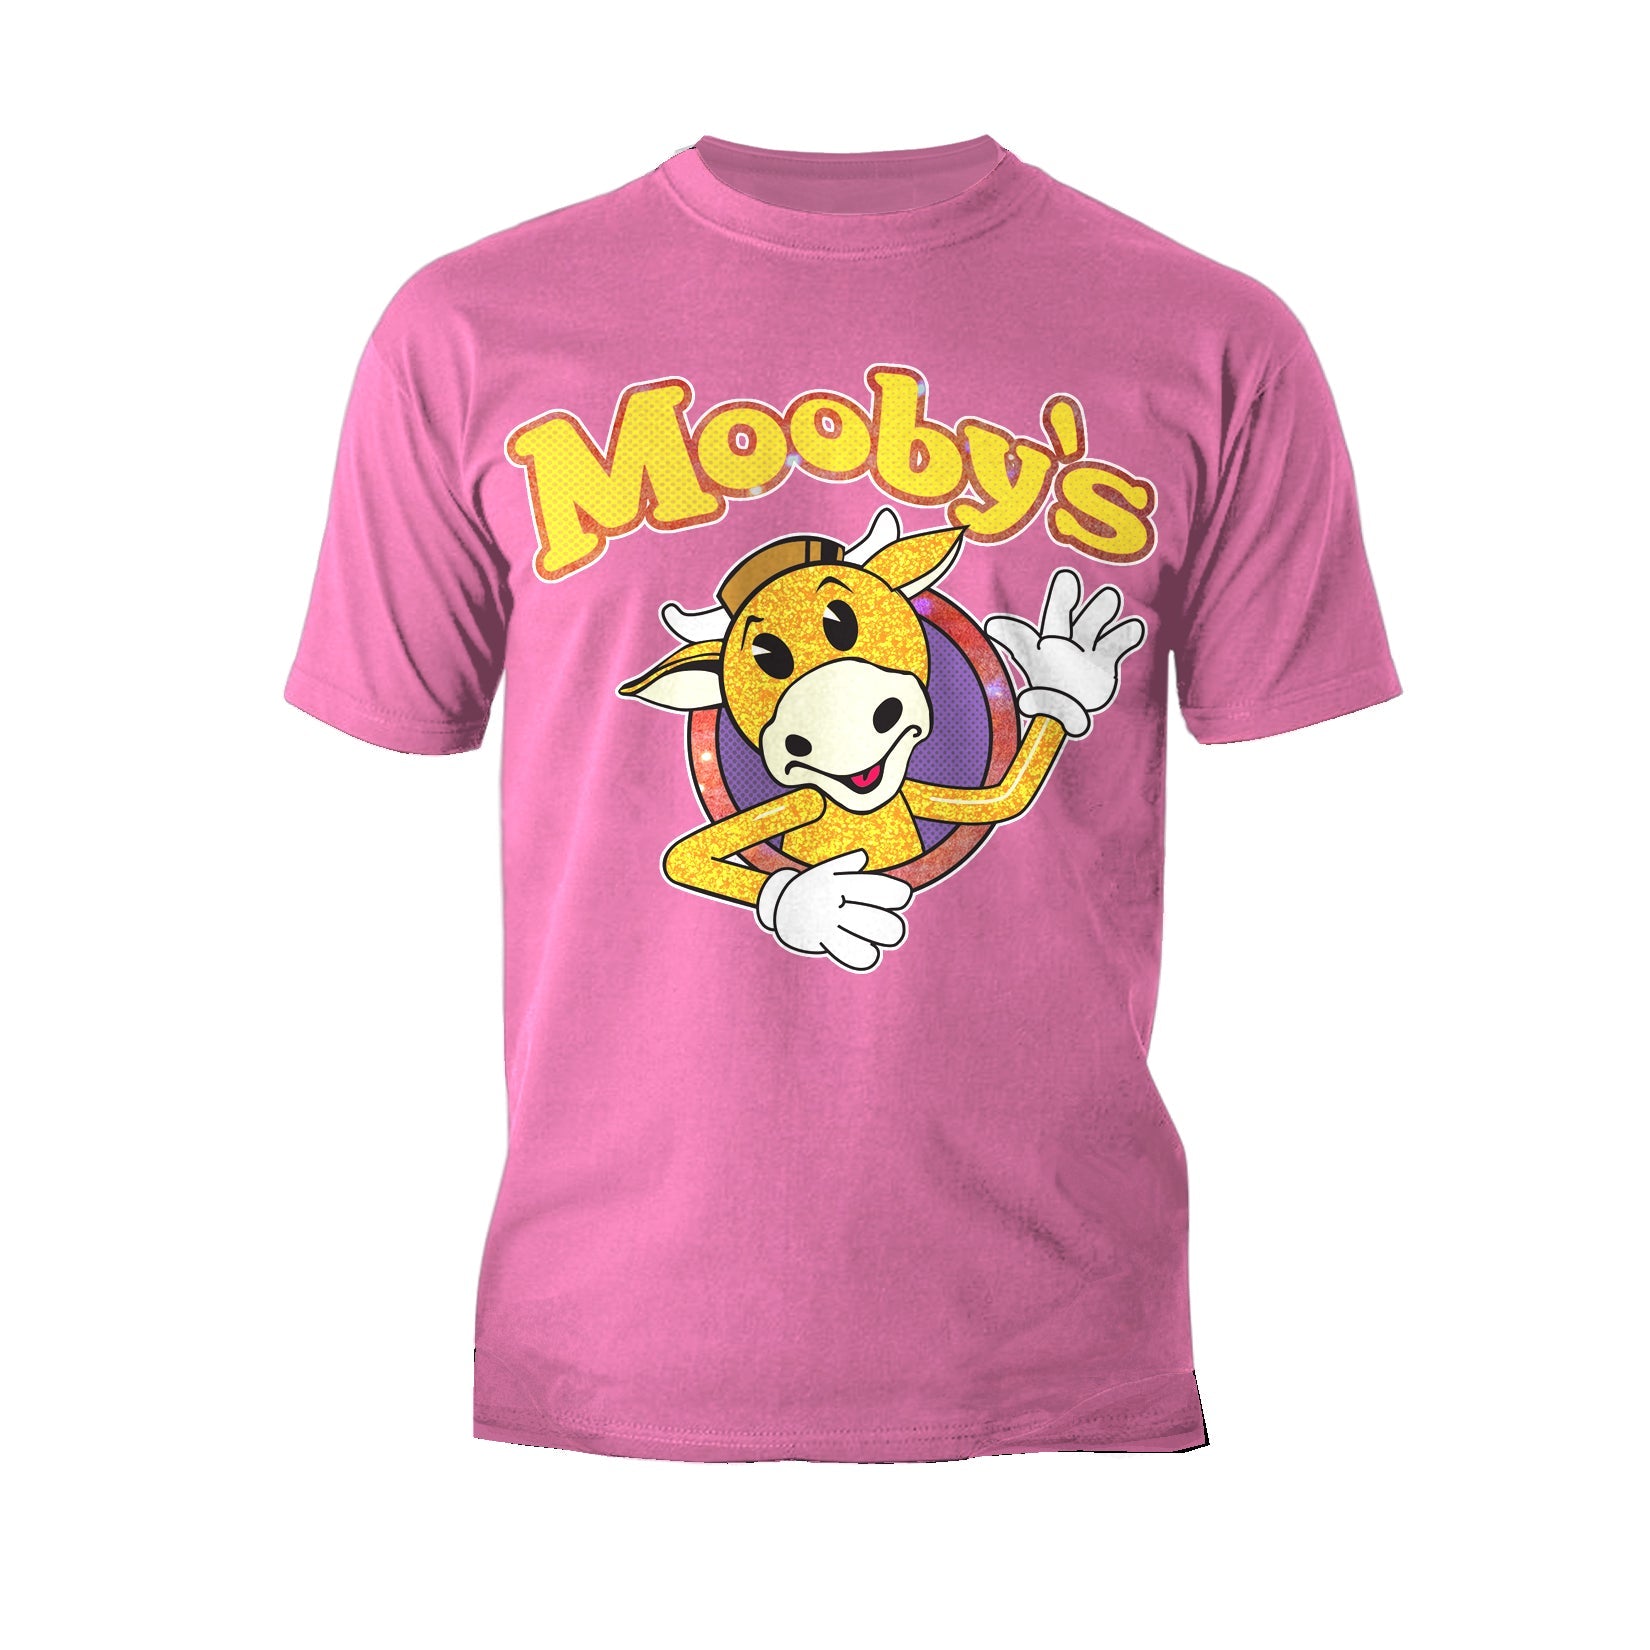 Kevin Smith View Askewniverse Mooby's Logo Golden Calf Edition Official Men's T-Shirt